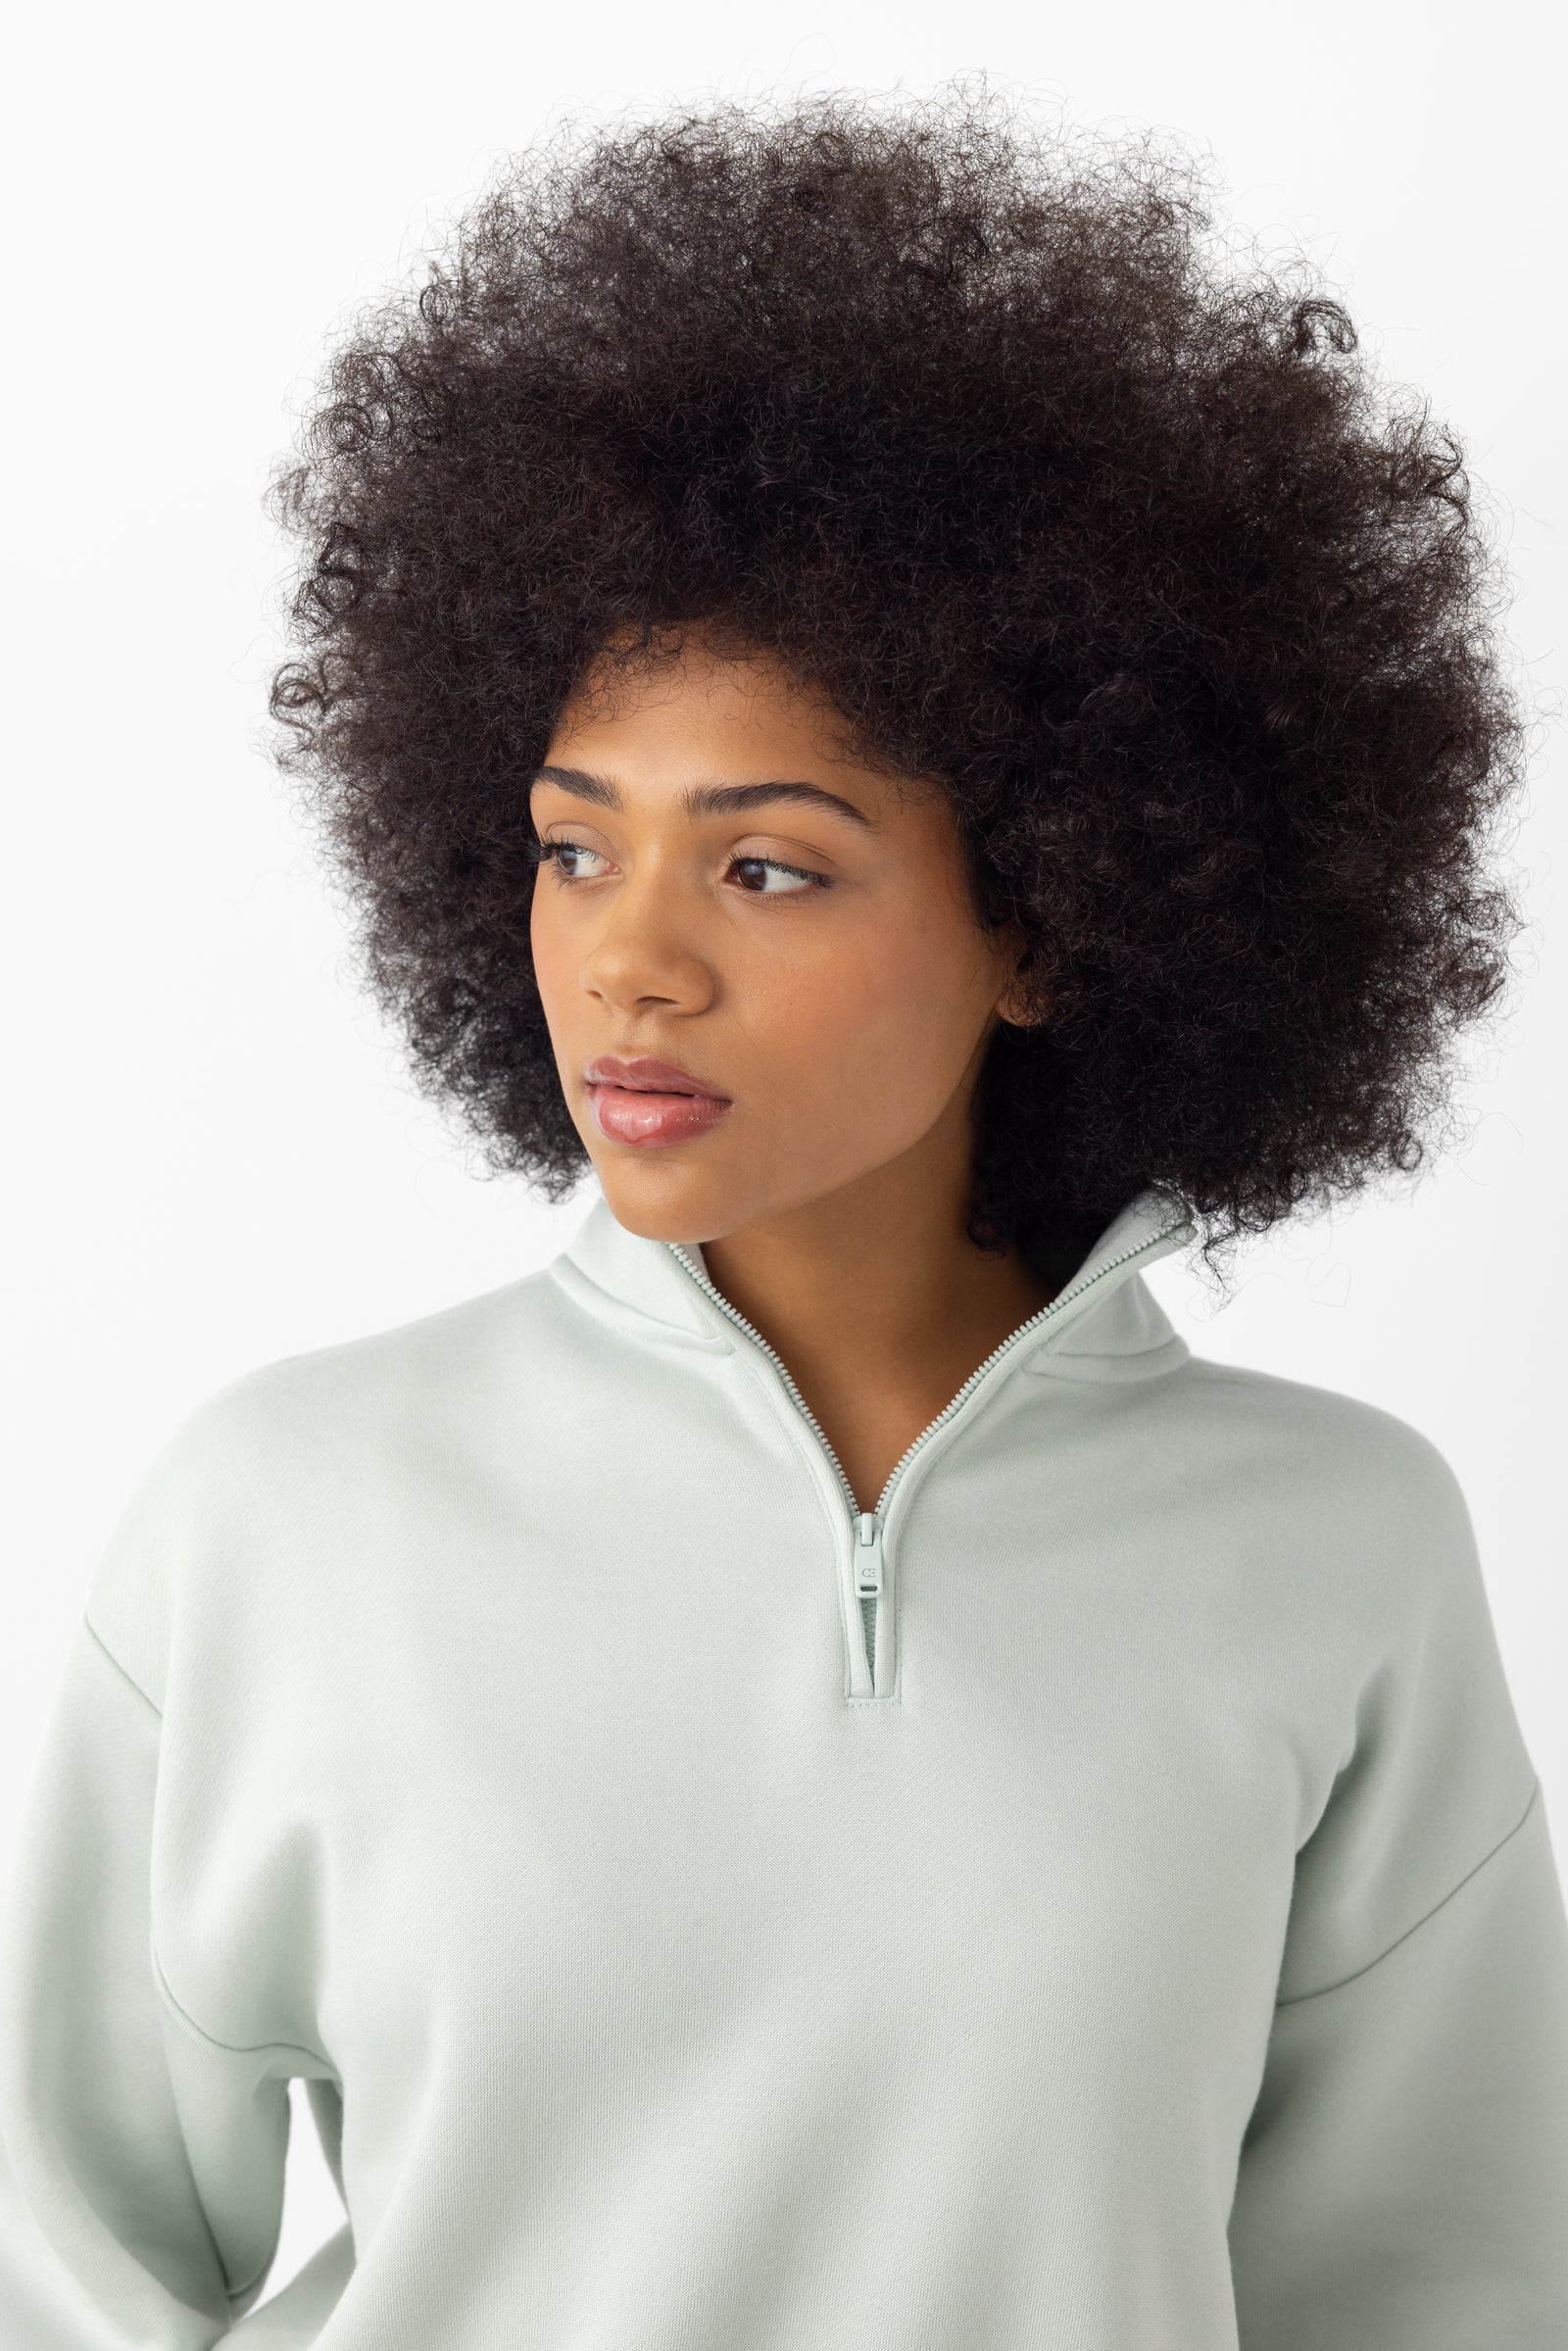 Arctic CityScape Quarter Zip. The quarter zip is being worn by a female model. The photo was taken with a white background. 